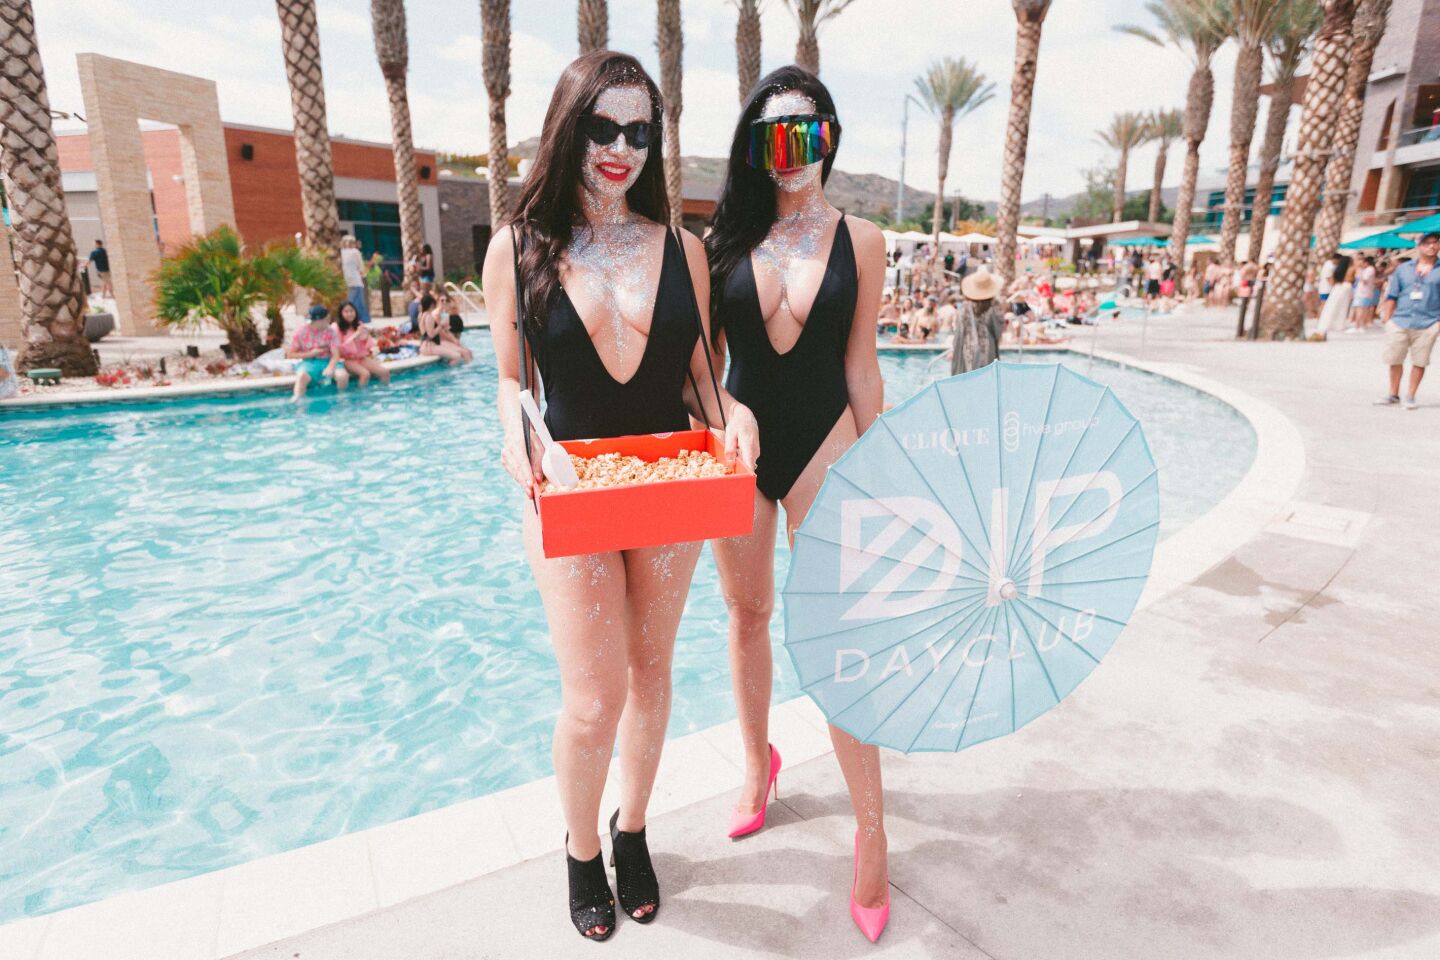 Sam Feldt spun at the opening of Sycuan Casino's DIP Dayclub on Saturday, May 25, 2019.